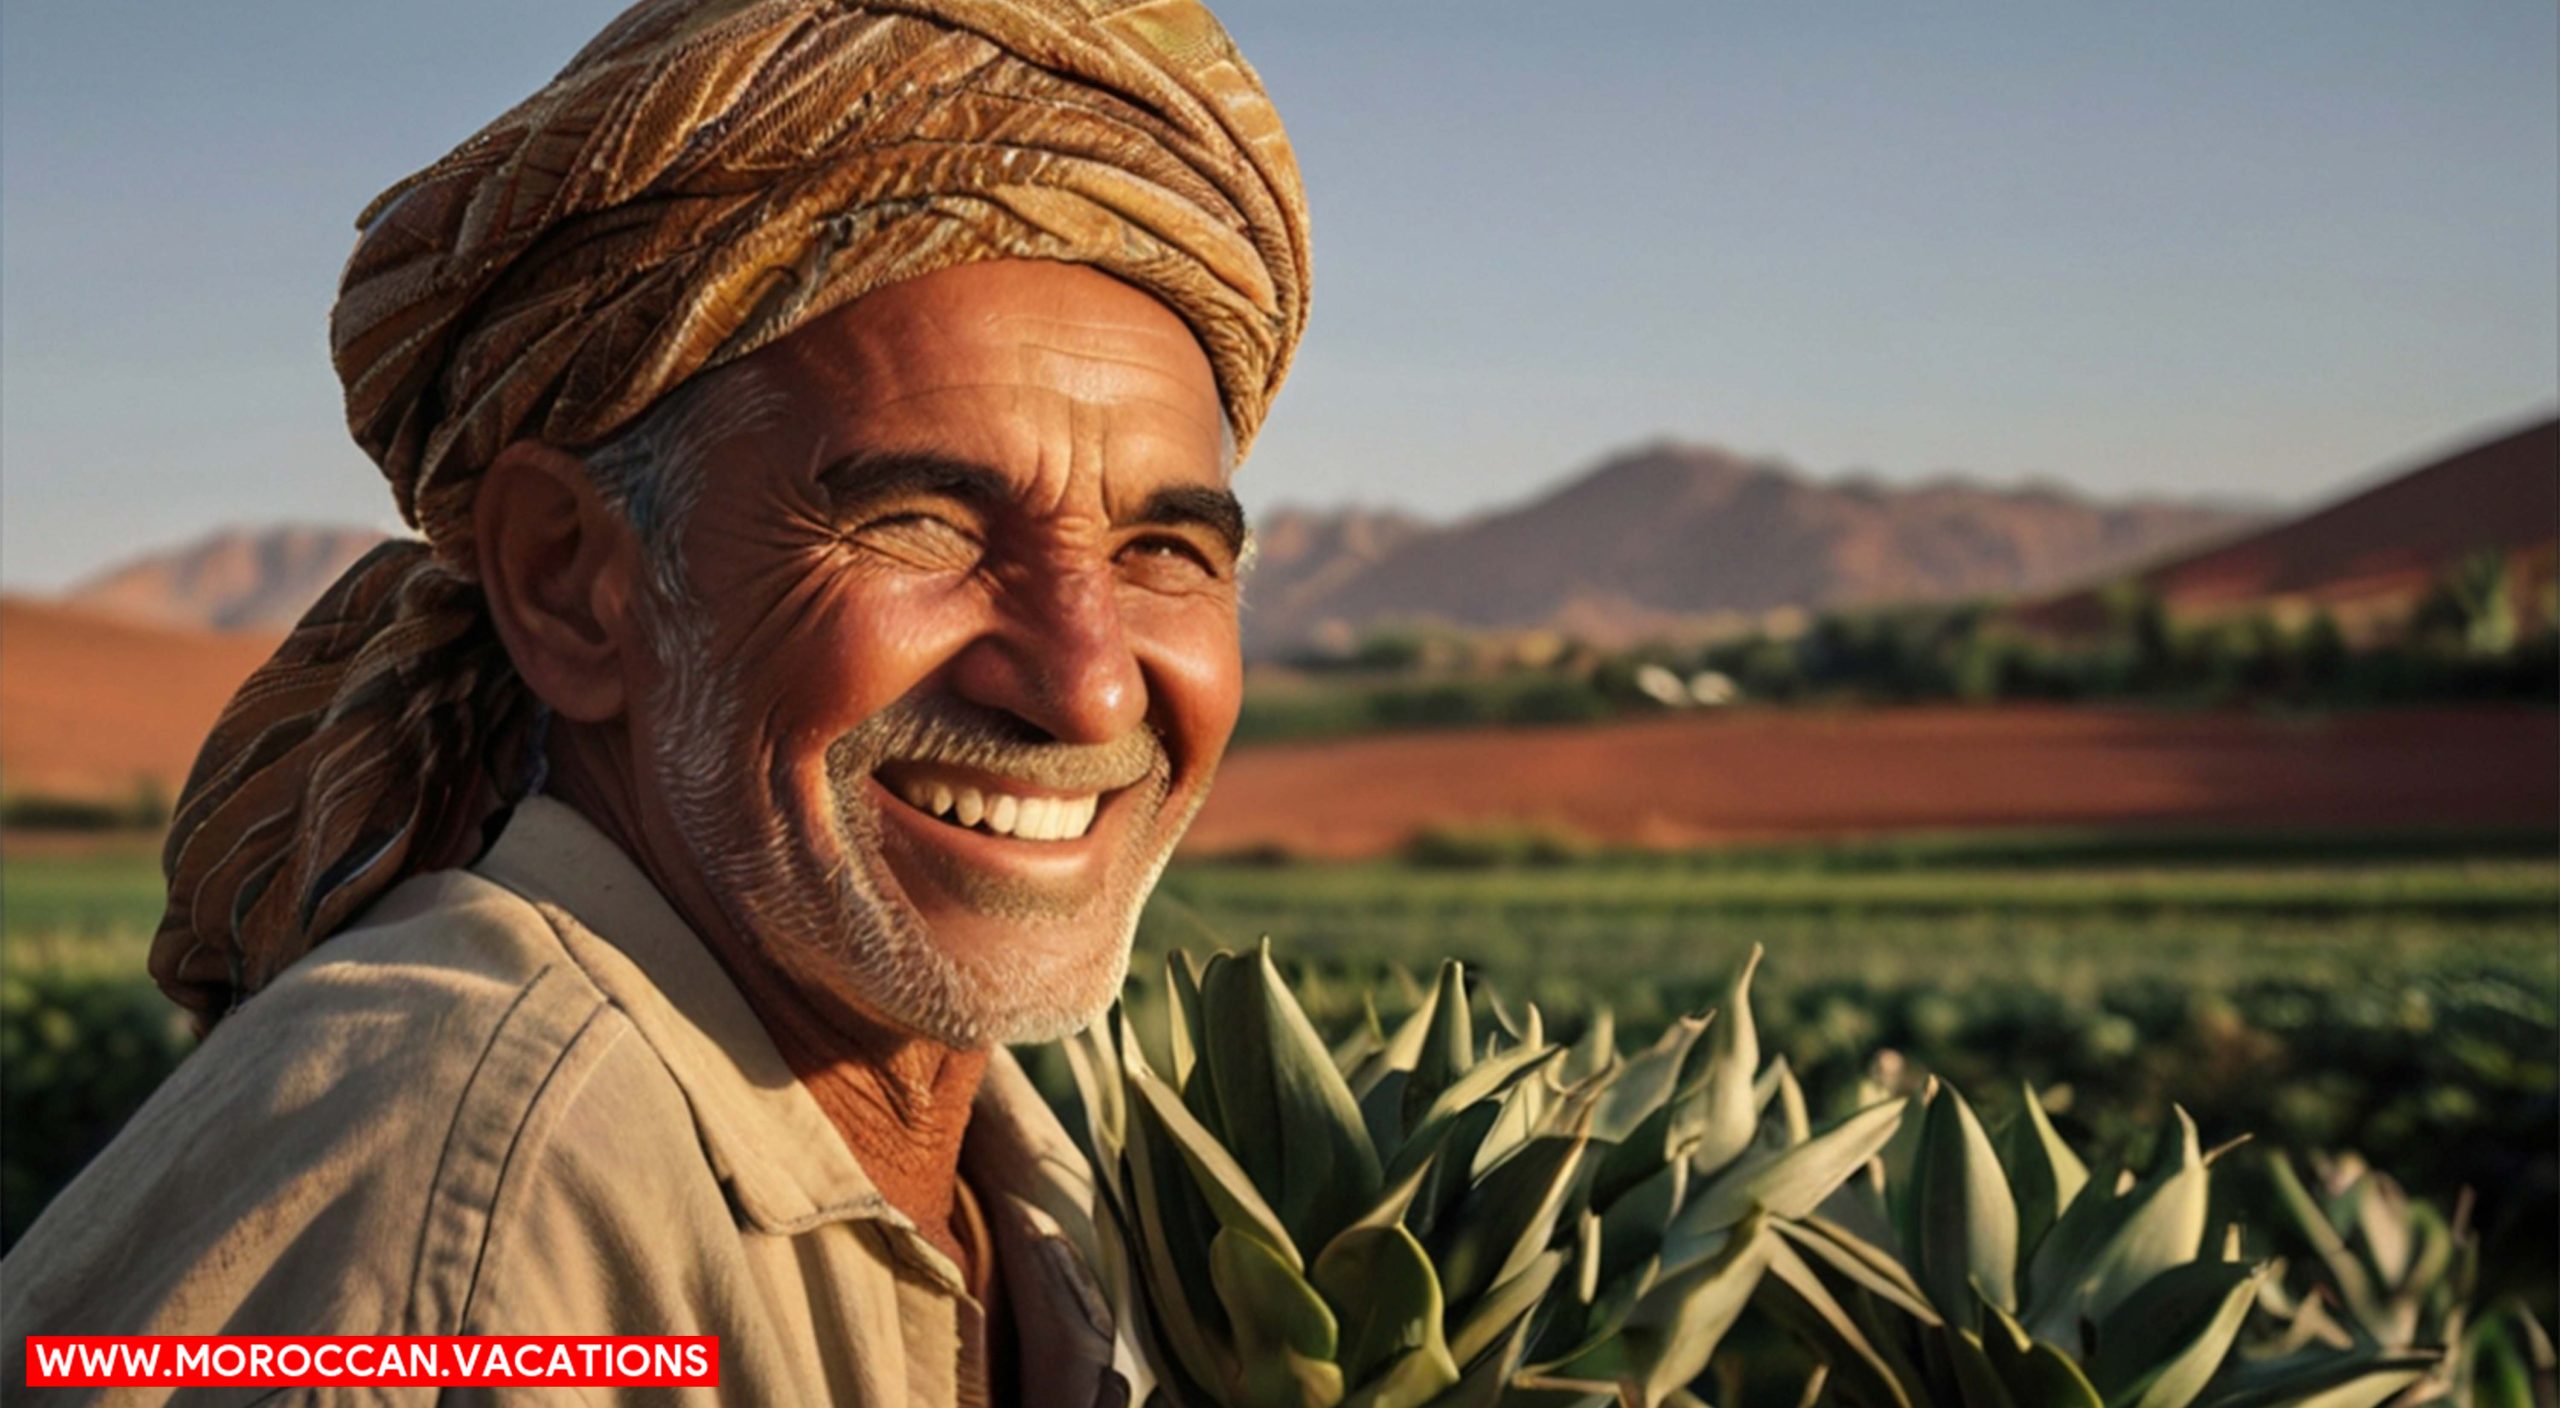 A Dades valley farmer close up picture.